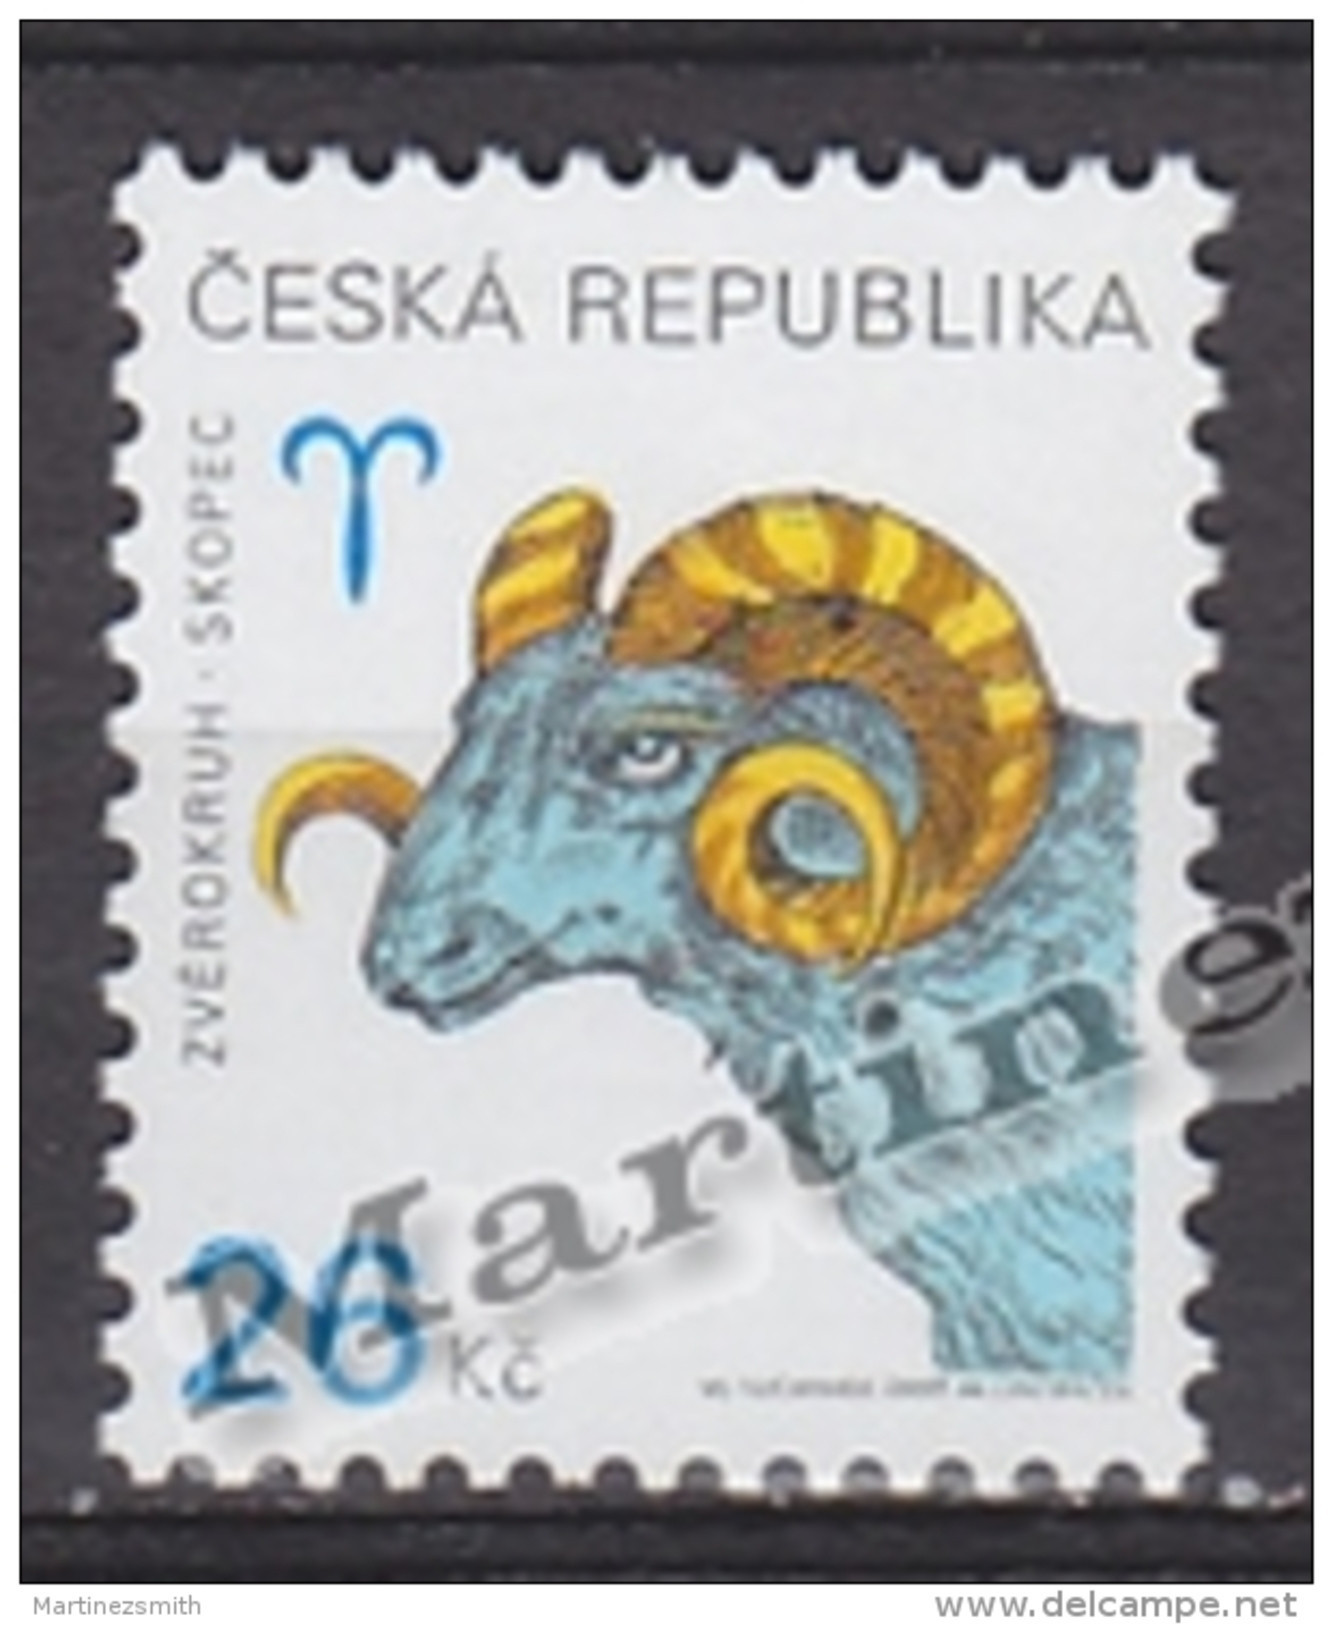 Czech Republic - Tcheque 2003 Yvert 324, Definitive, Zodiac Signs - Aries - MNH - Unused Stamps